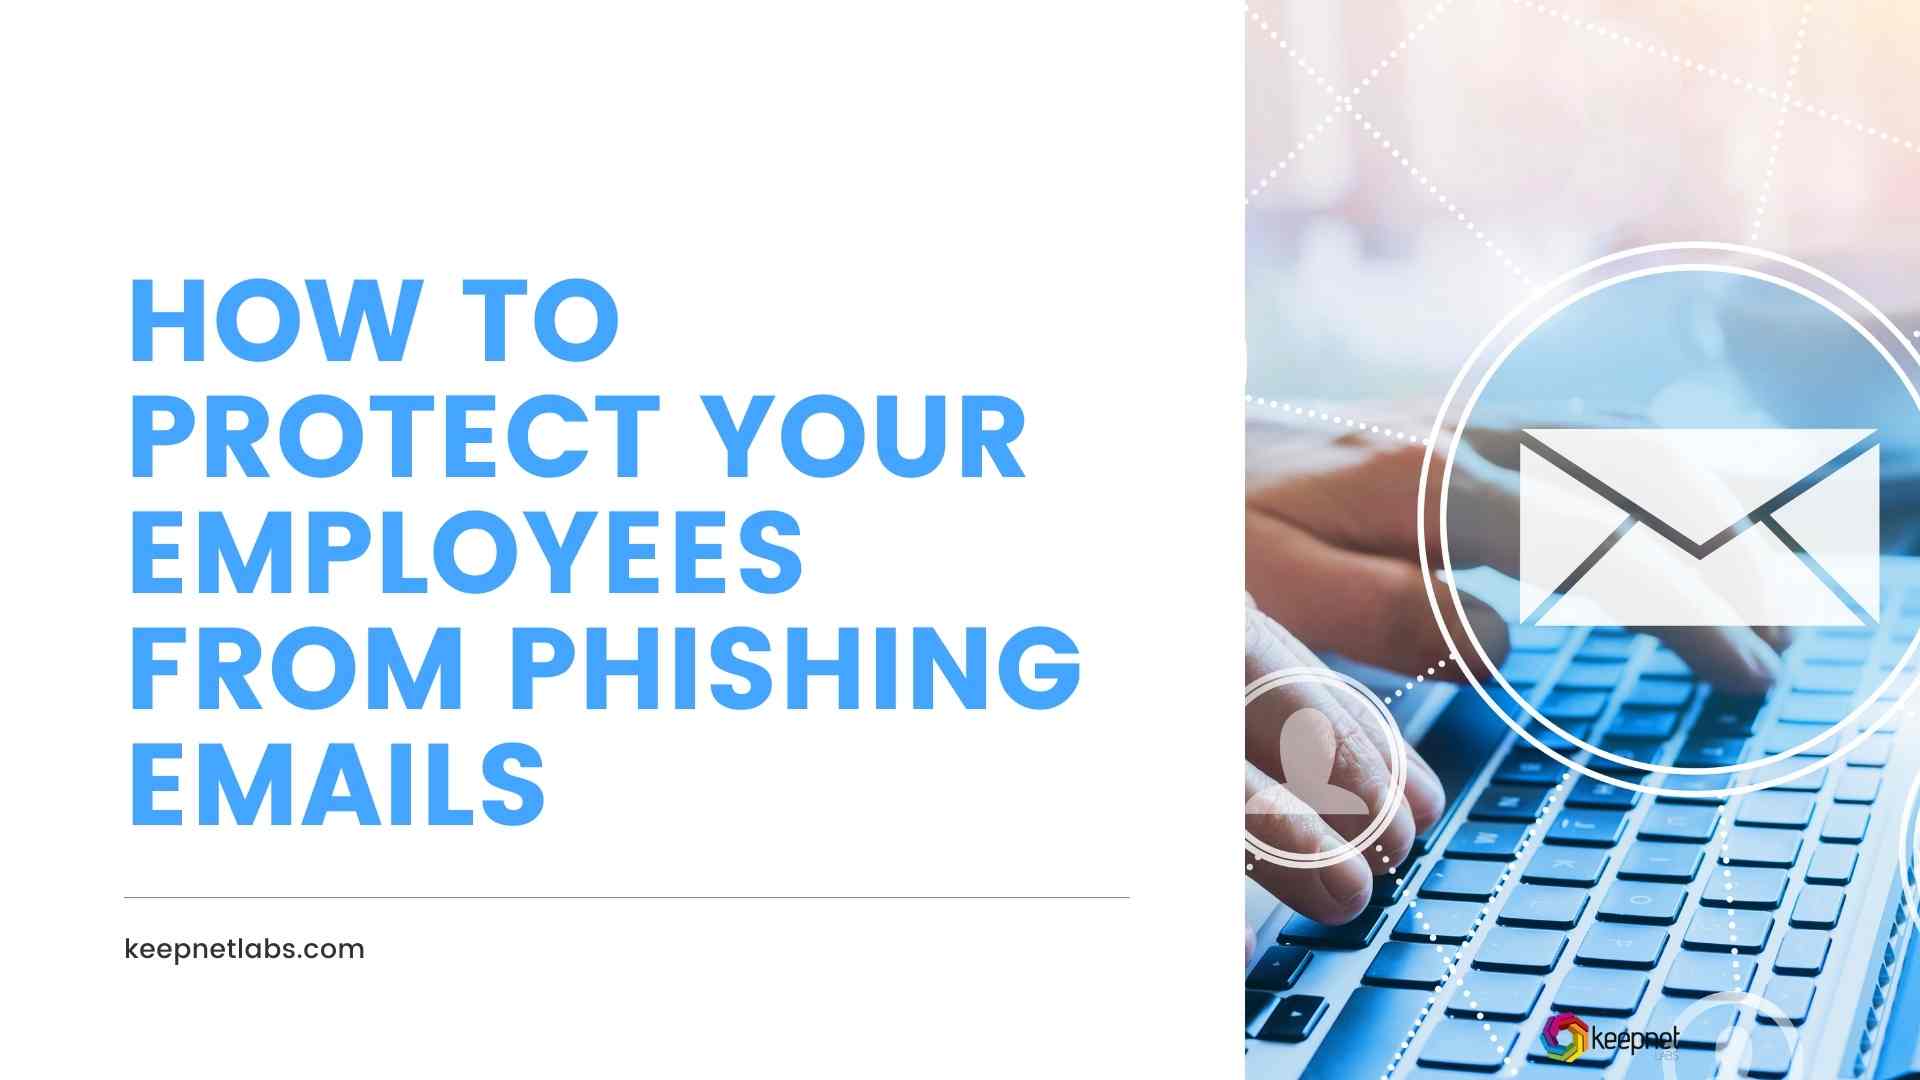 How to Protect Your Employees from Phishing Emails